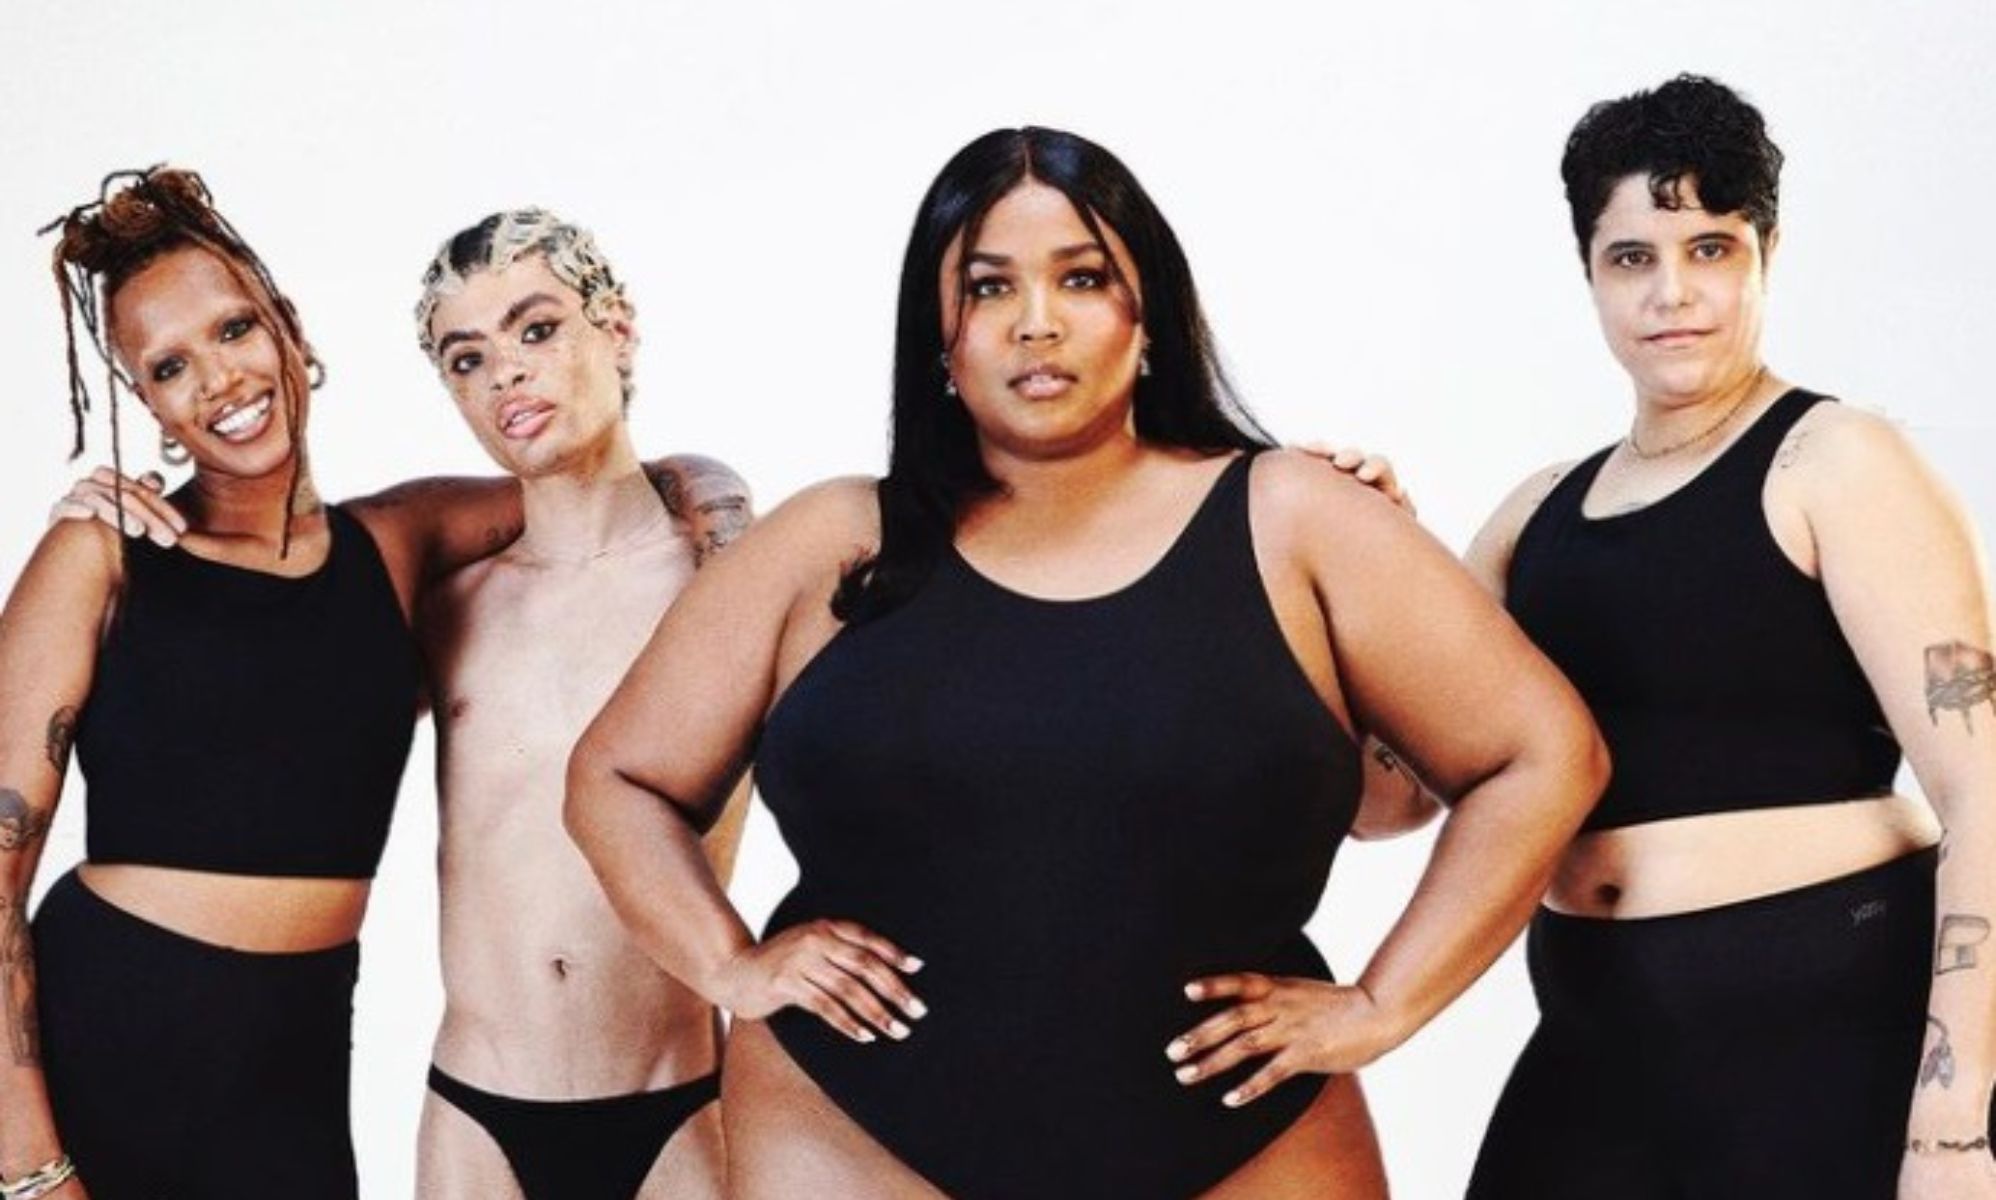 Lizzo and Yitty announce gender affirming shapewear collection